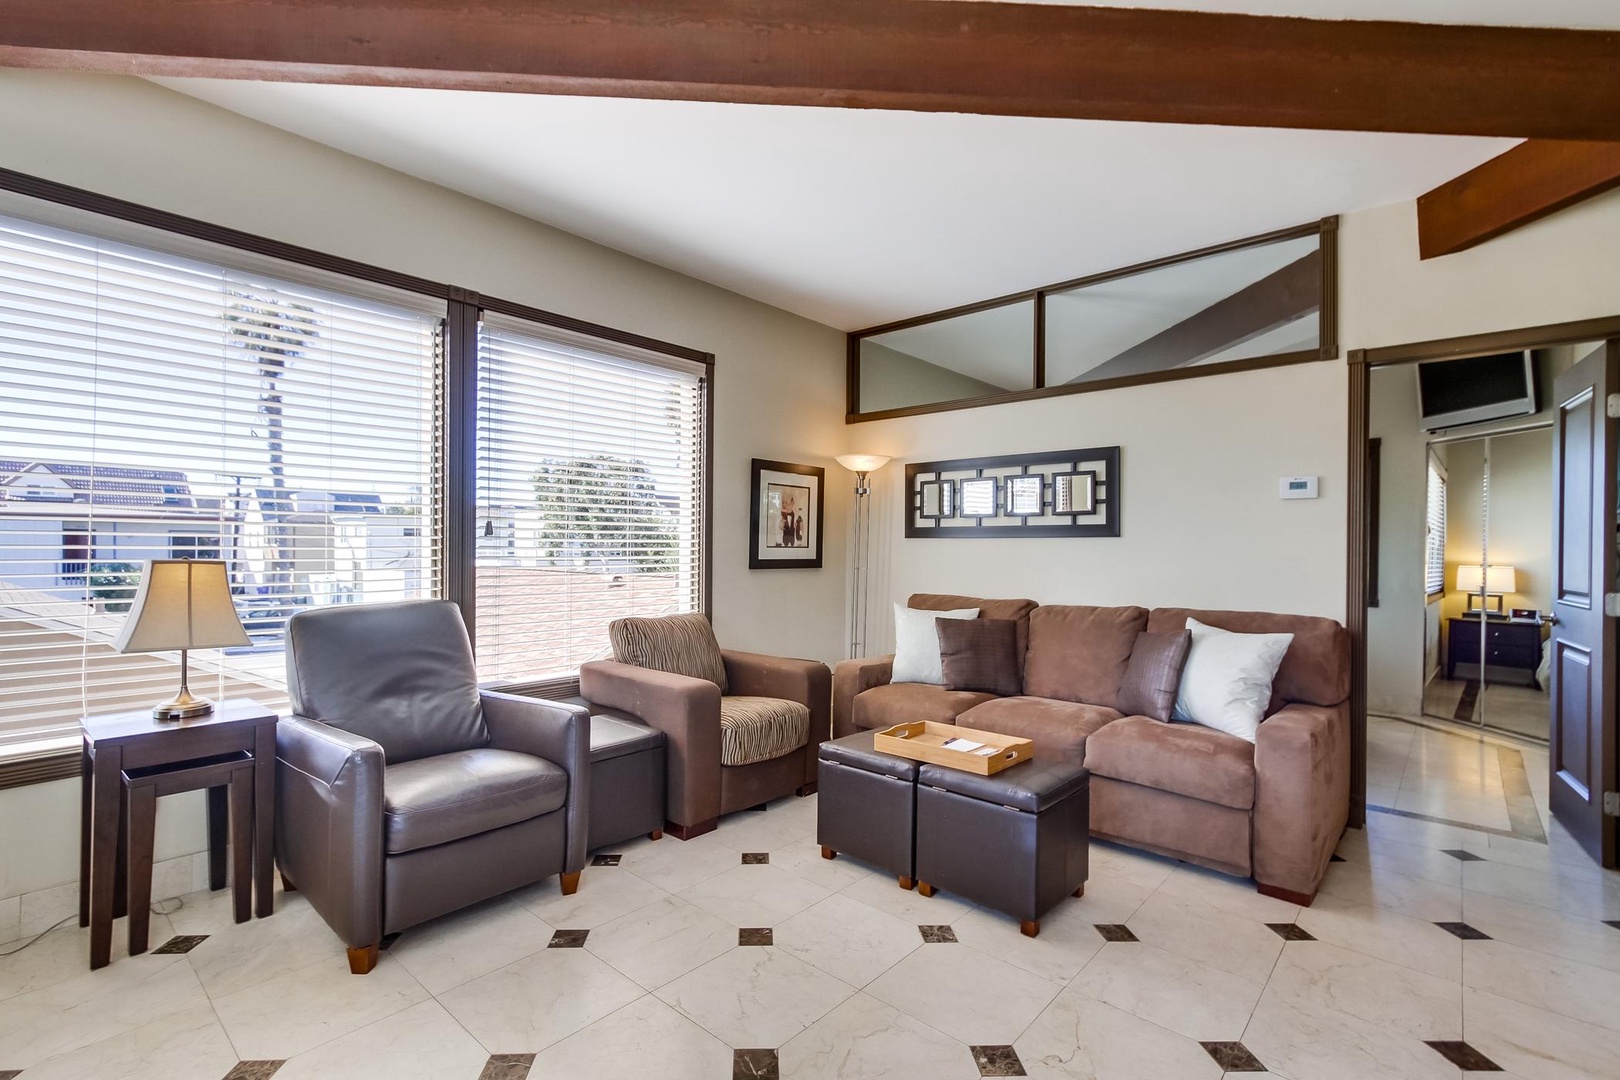 Comfortable seating in living area